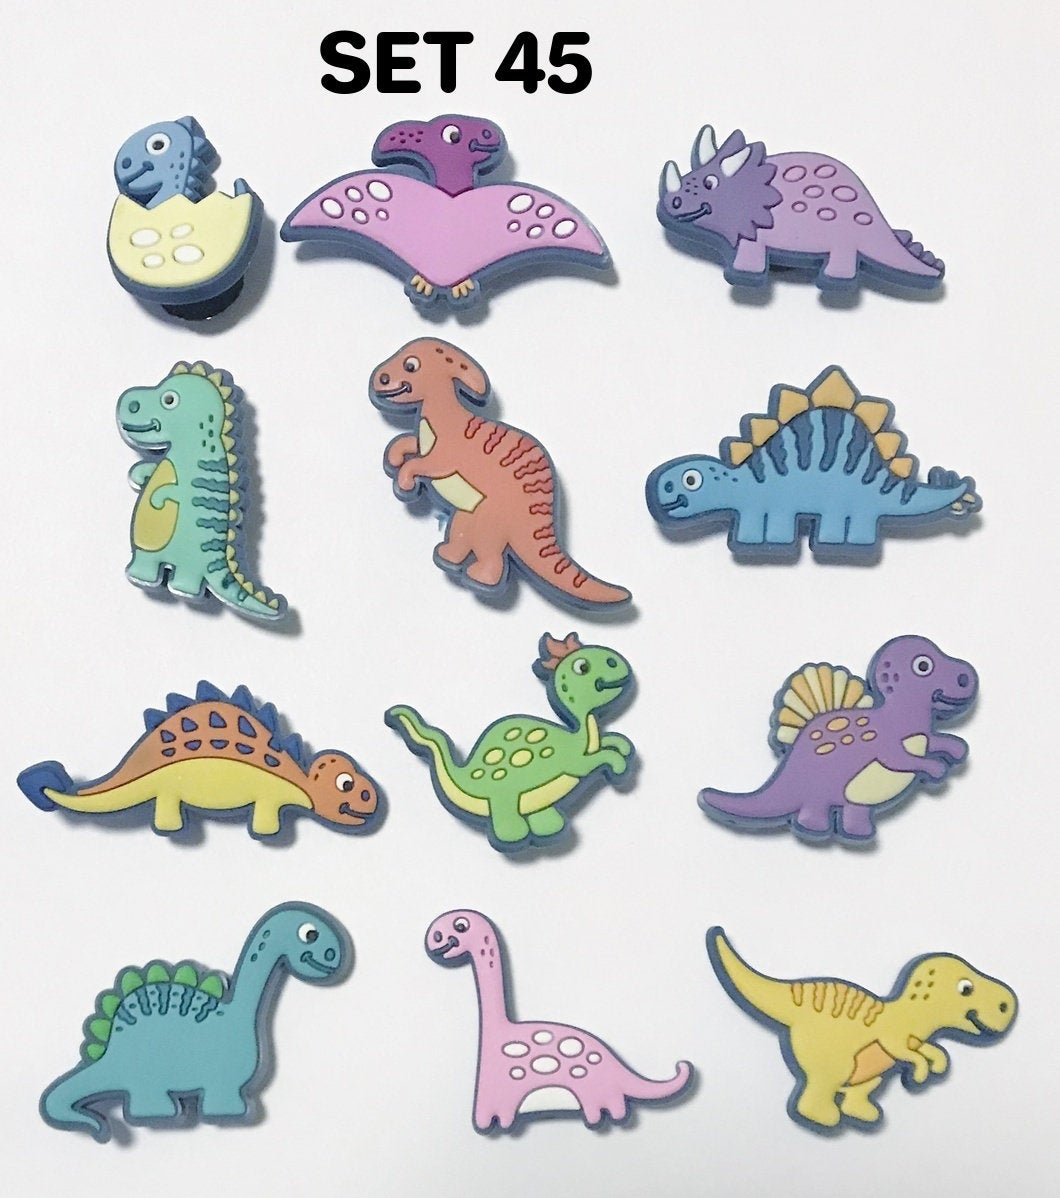 Shoe charm sets-reduced prices, dinosaur, mask, girls